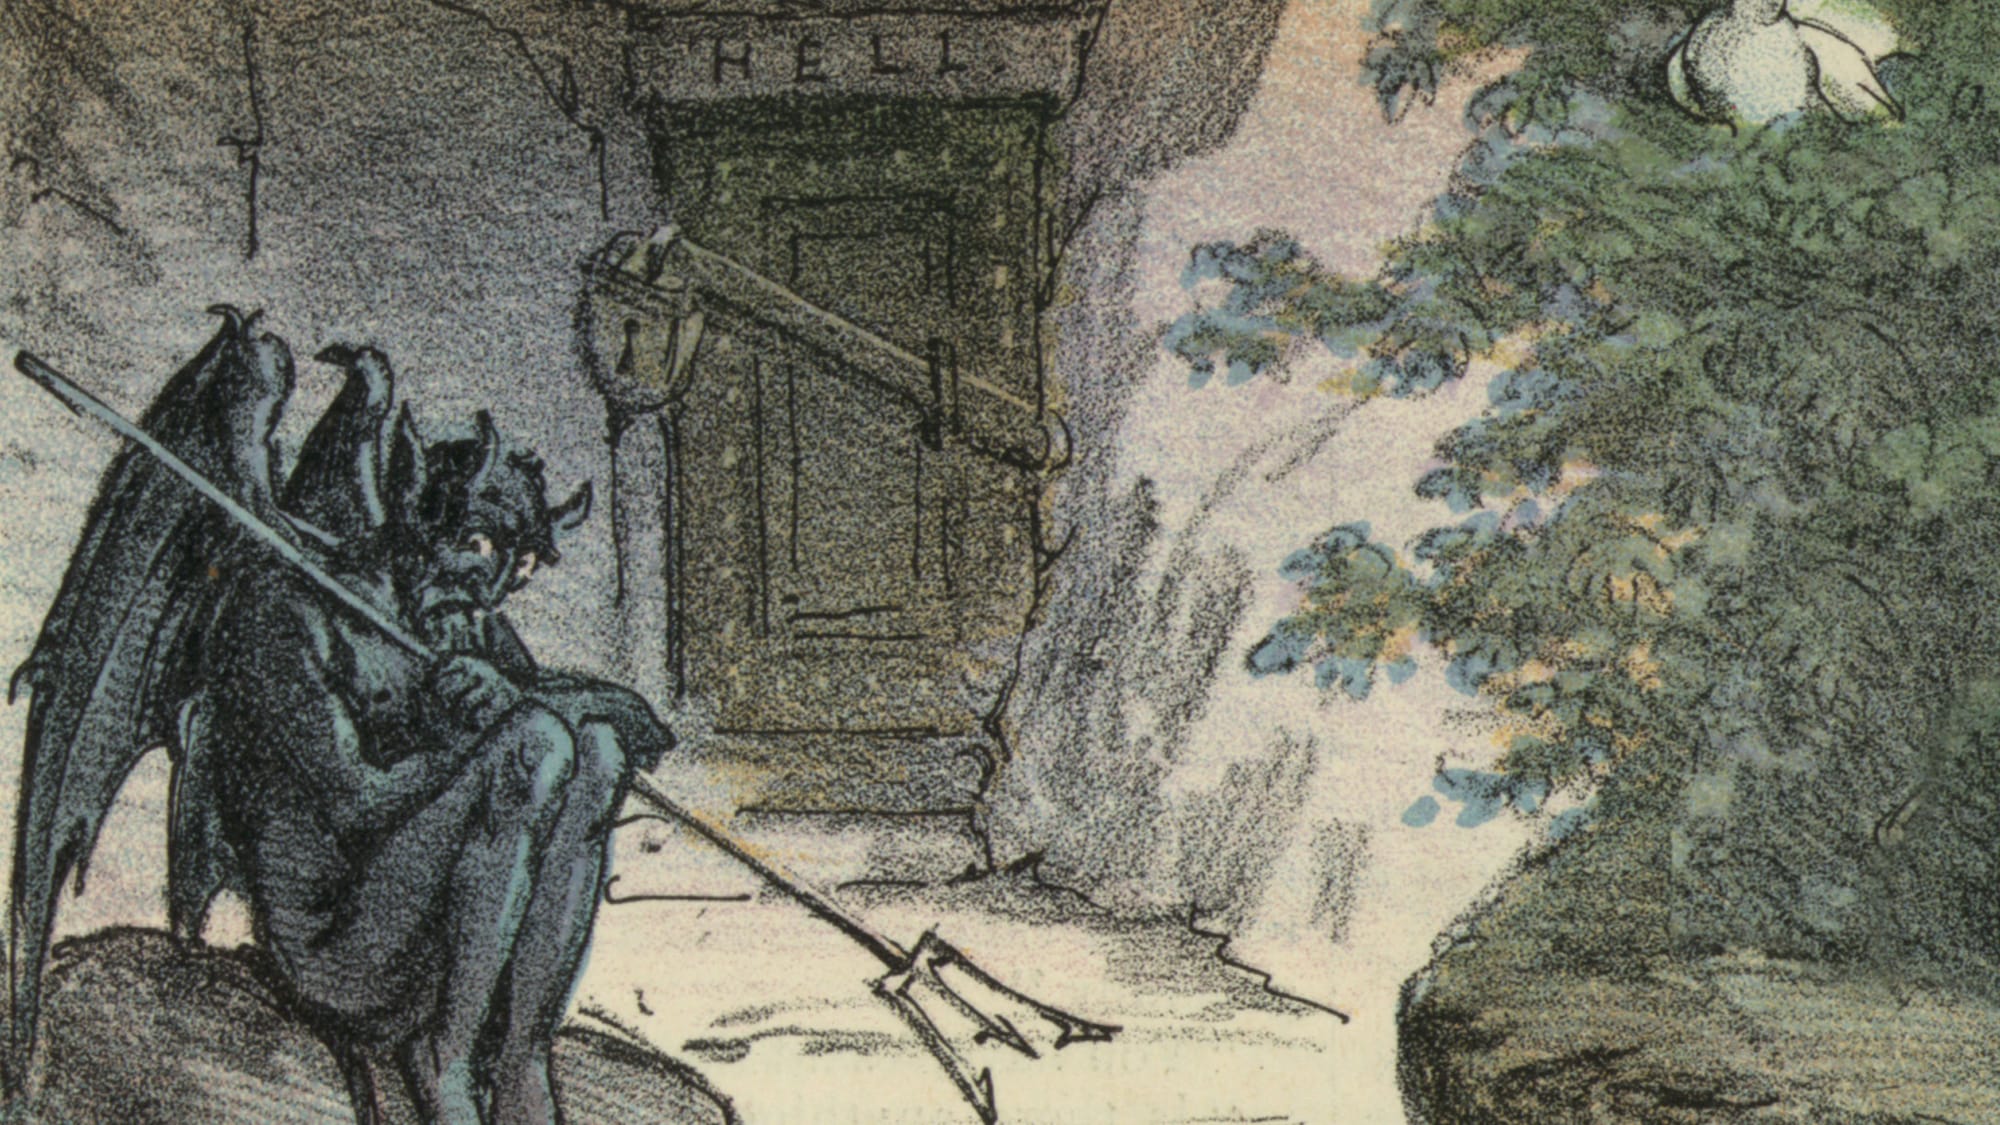 Detail from 'Sheol', Joseph Ferdinand Kepler (1889), shows a disappointed Satan, seated on a rock and holding his trident, at the locked and barred door to Hell. The very fine large scan at the Library of Congress is described thusly: “Illustration shows a number of historical figures enjoying the pleasant atmosphere of ‘Sheol’ after suffering the flames of Hell; at left is a dejected Devil sitting beneath a sign that states ‘This Business is Removed to Sheol, Opposite’. Among those ferried across the river by ‘Charon' are ‘Hypatia, Fanny Elssler, Voltaire, Frederick [the] Great, Socrates, J. Offenbach, Darwin, J.S. Mill, Rousseau, George Sand, Galileo, Jefferson, Th. Paine, Goethe, [and] H. Heine.’” 